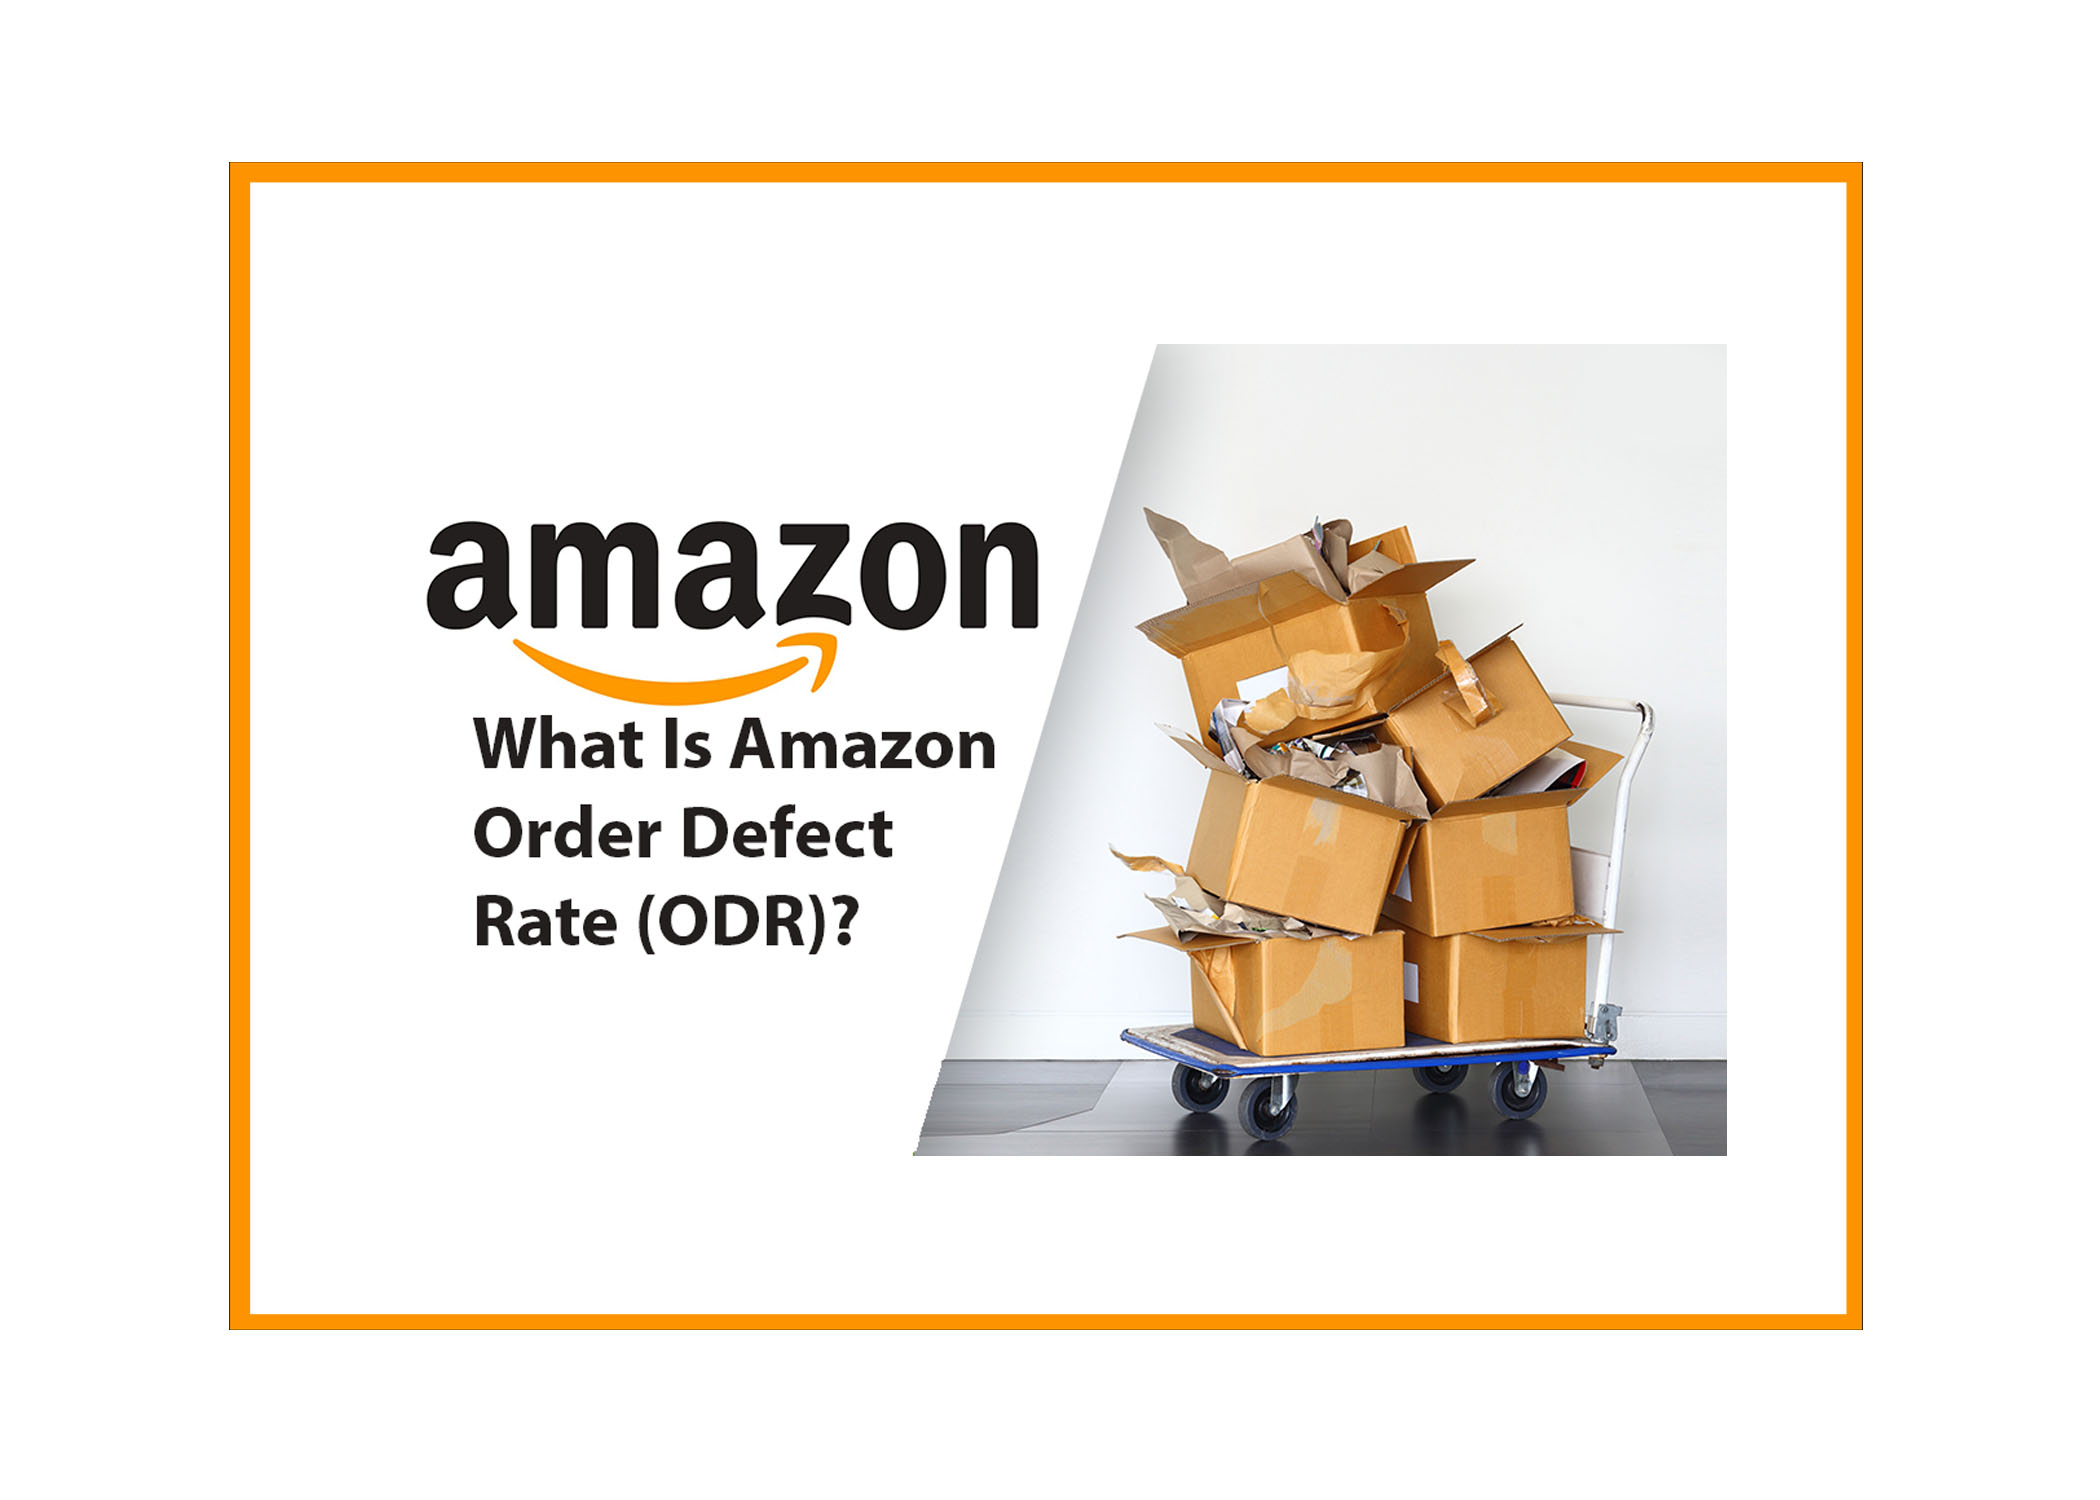 What Is Amazon Order Defect Rate (ODR)?